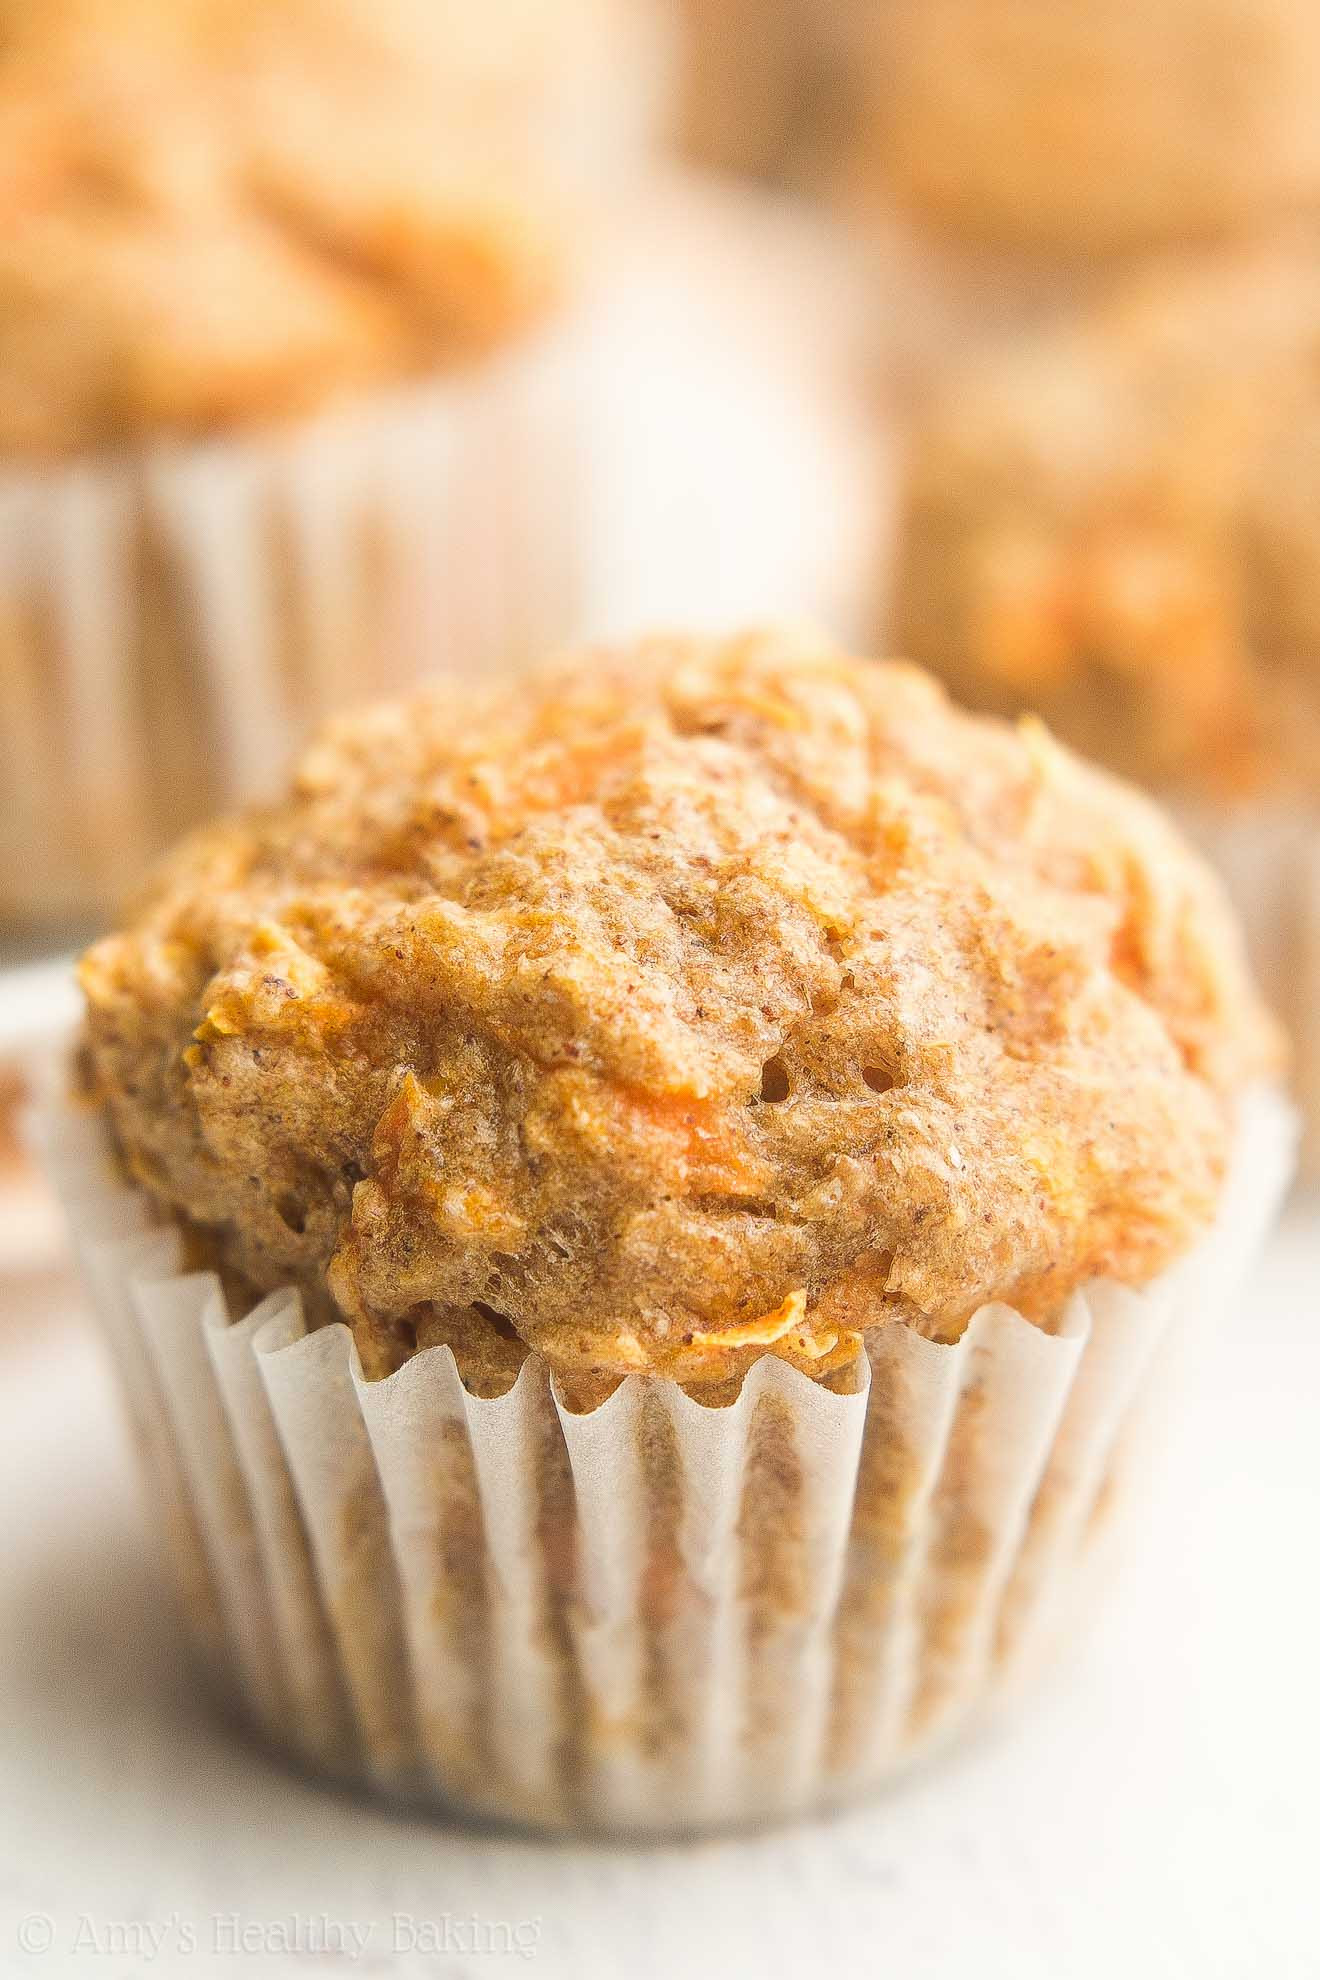 Carrot Cake Muffins Healthy
 Healthy Carrot Cake Mini Muffins